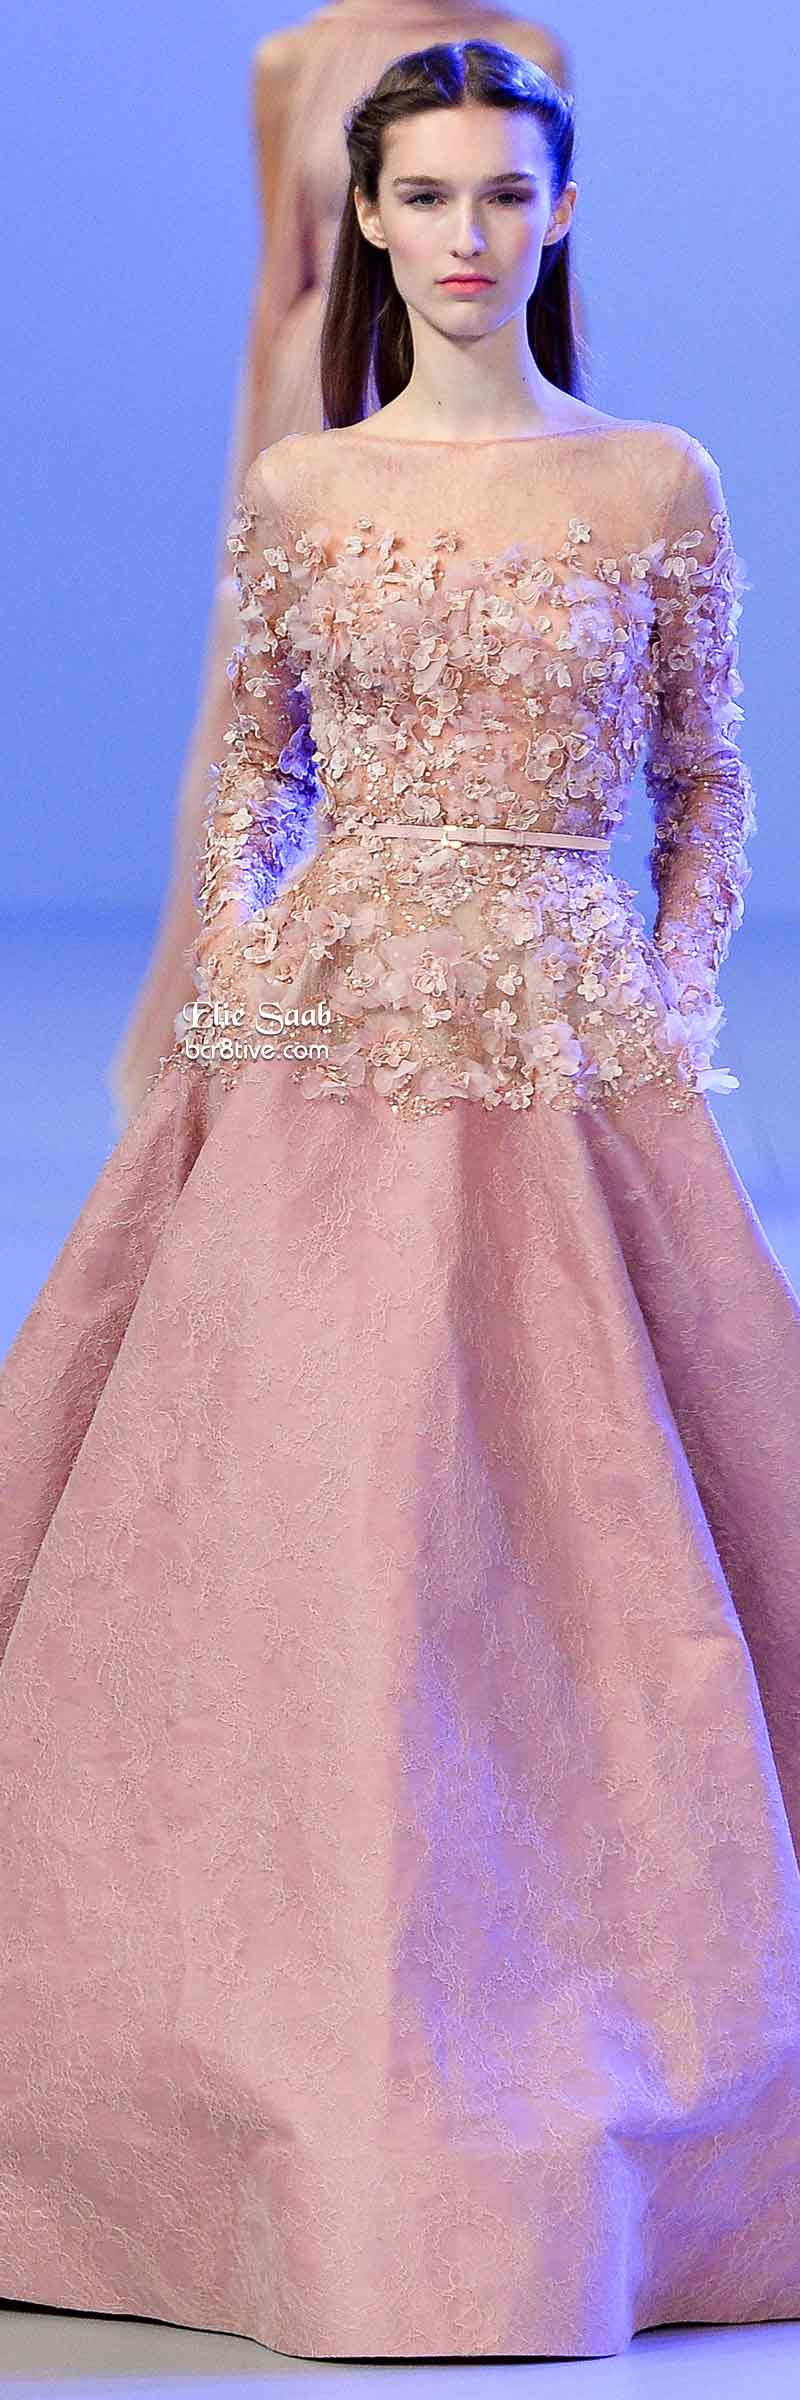 Elie Saab Spring 2014 Couture Collection – Be Creative